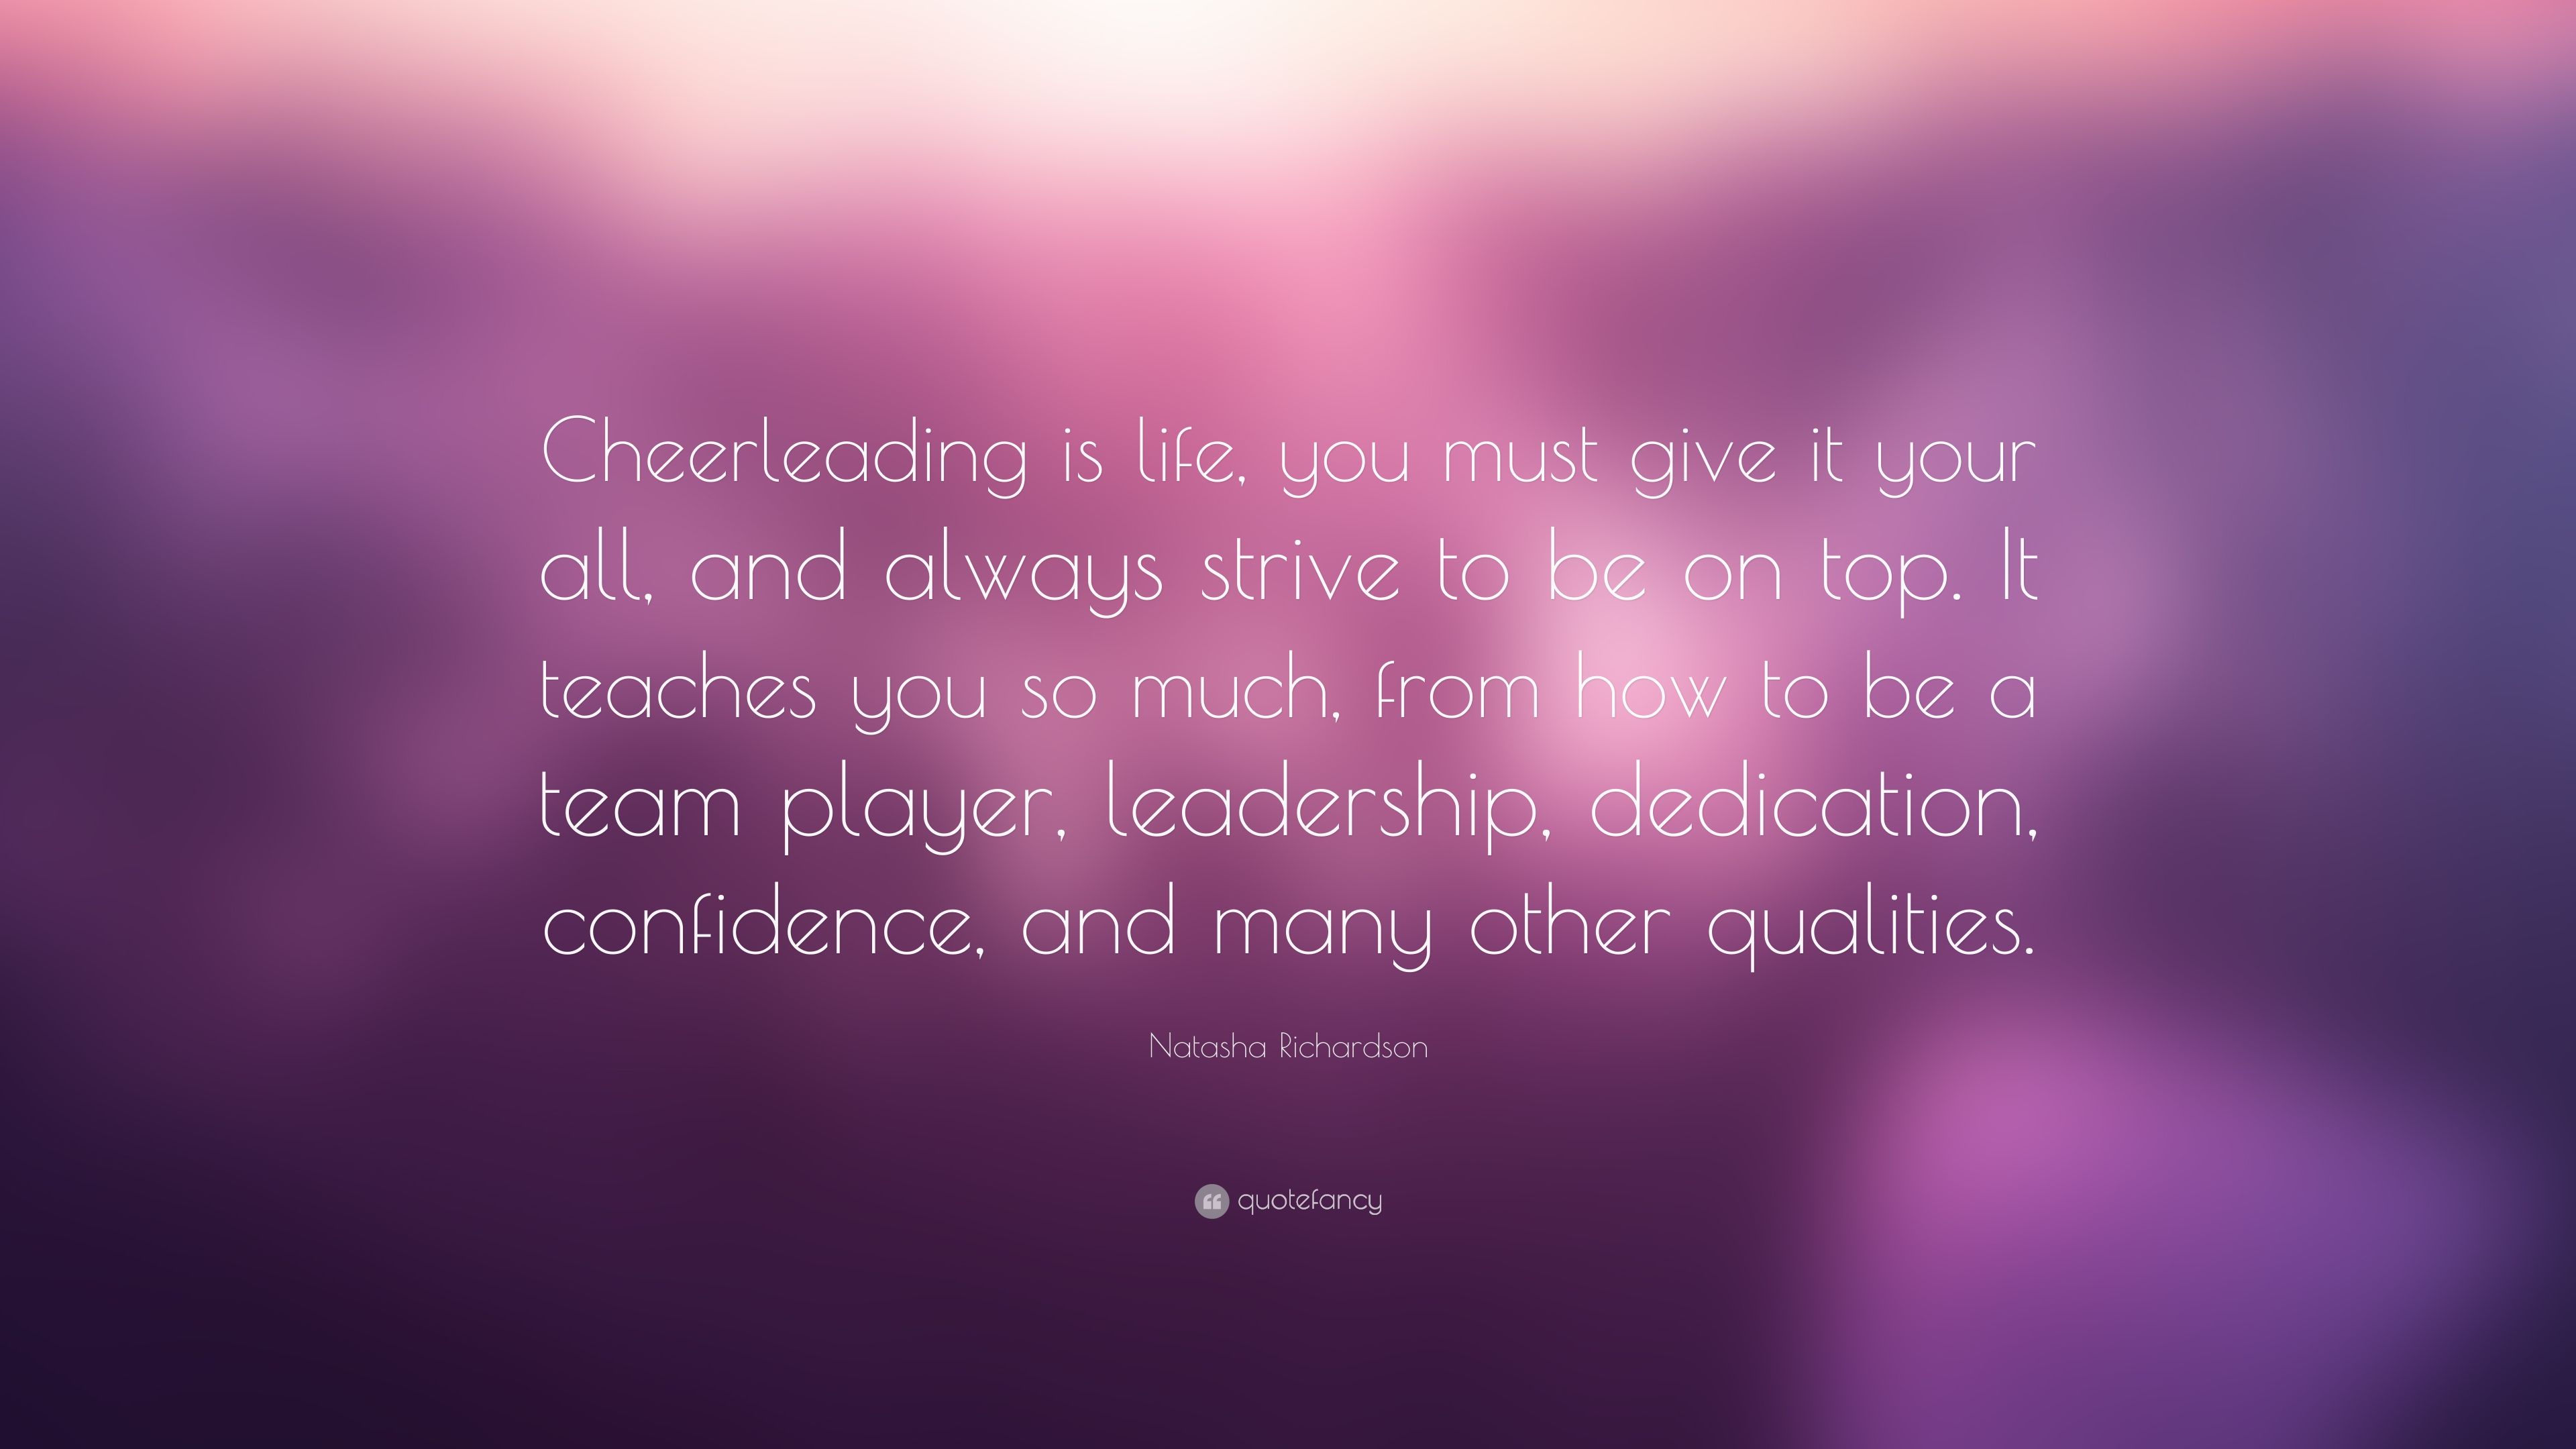 Cheerleading Quote Wallpapers on WallpaperDog